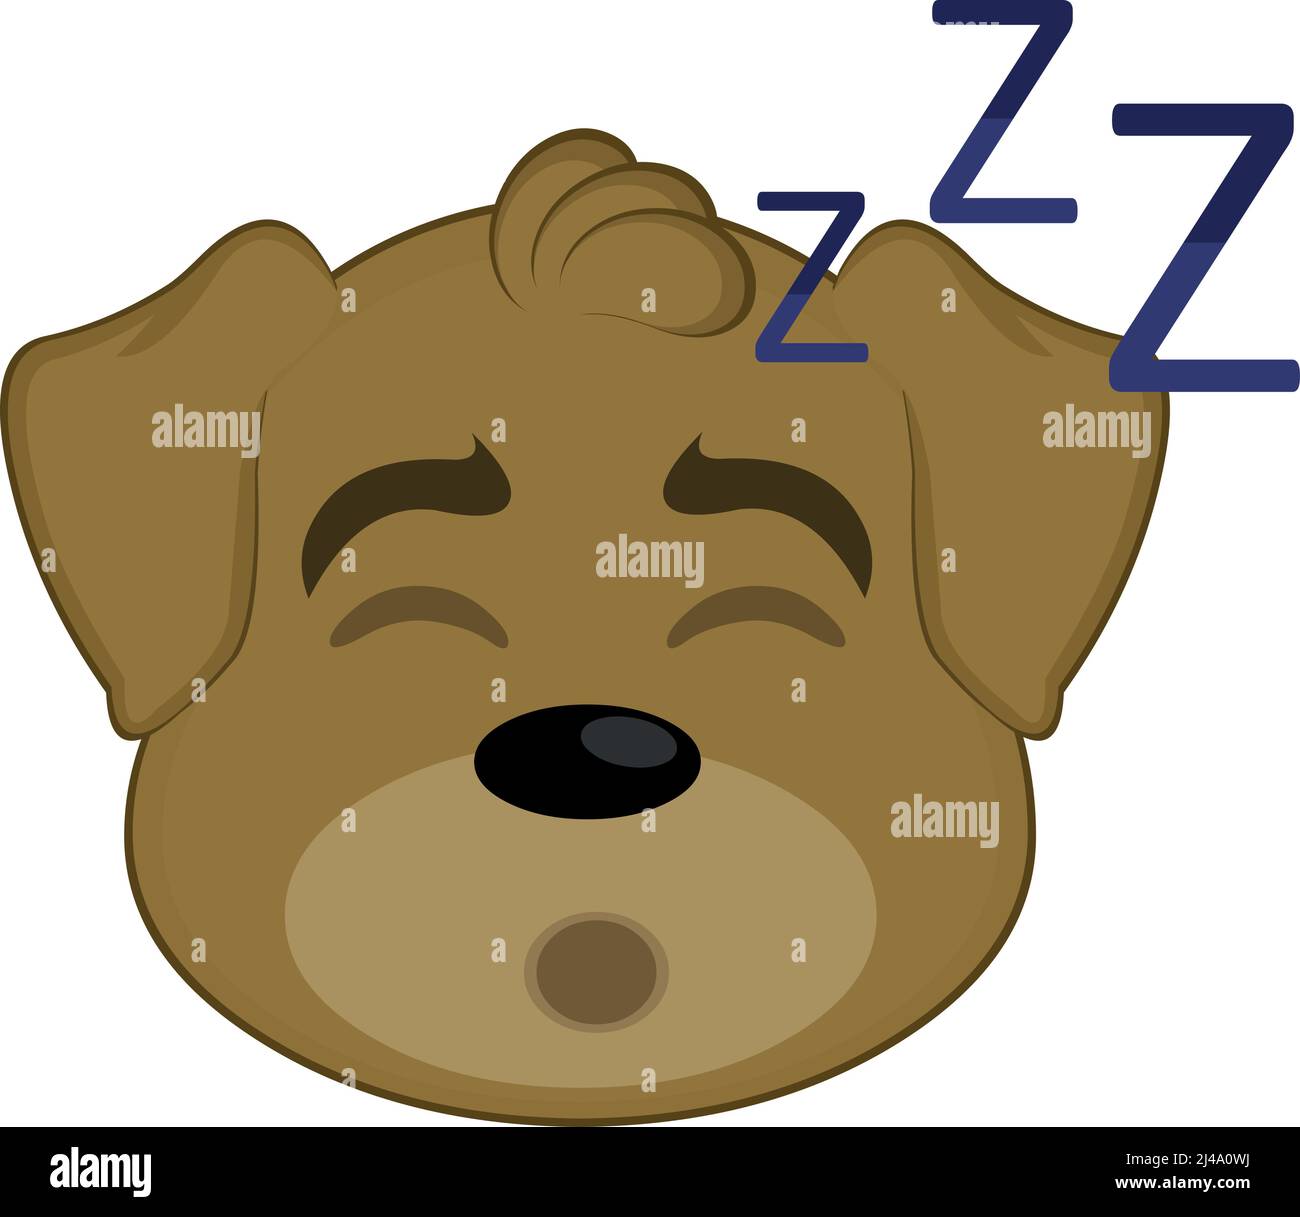 Vector emoticon illustration cartoon of a dog's head with tired expression and its eyes closed and snoring with its mouth open, sleeping Stock Vector